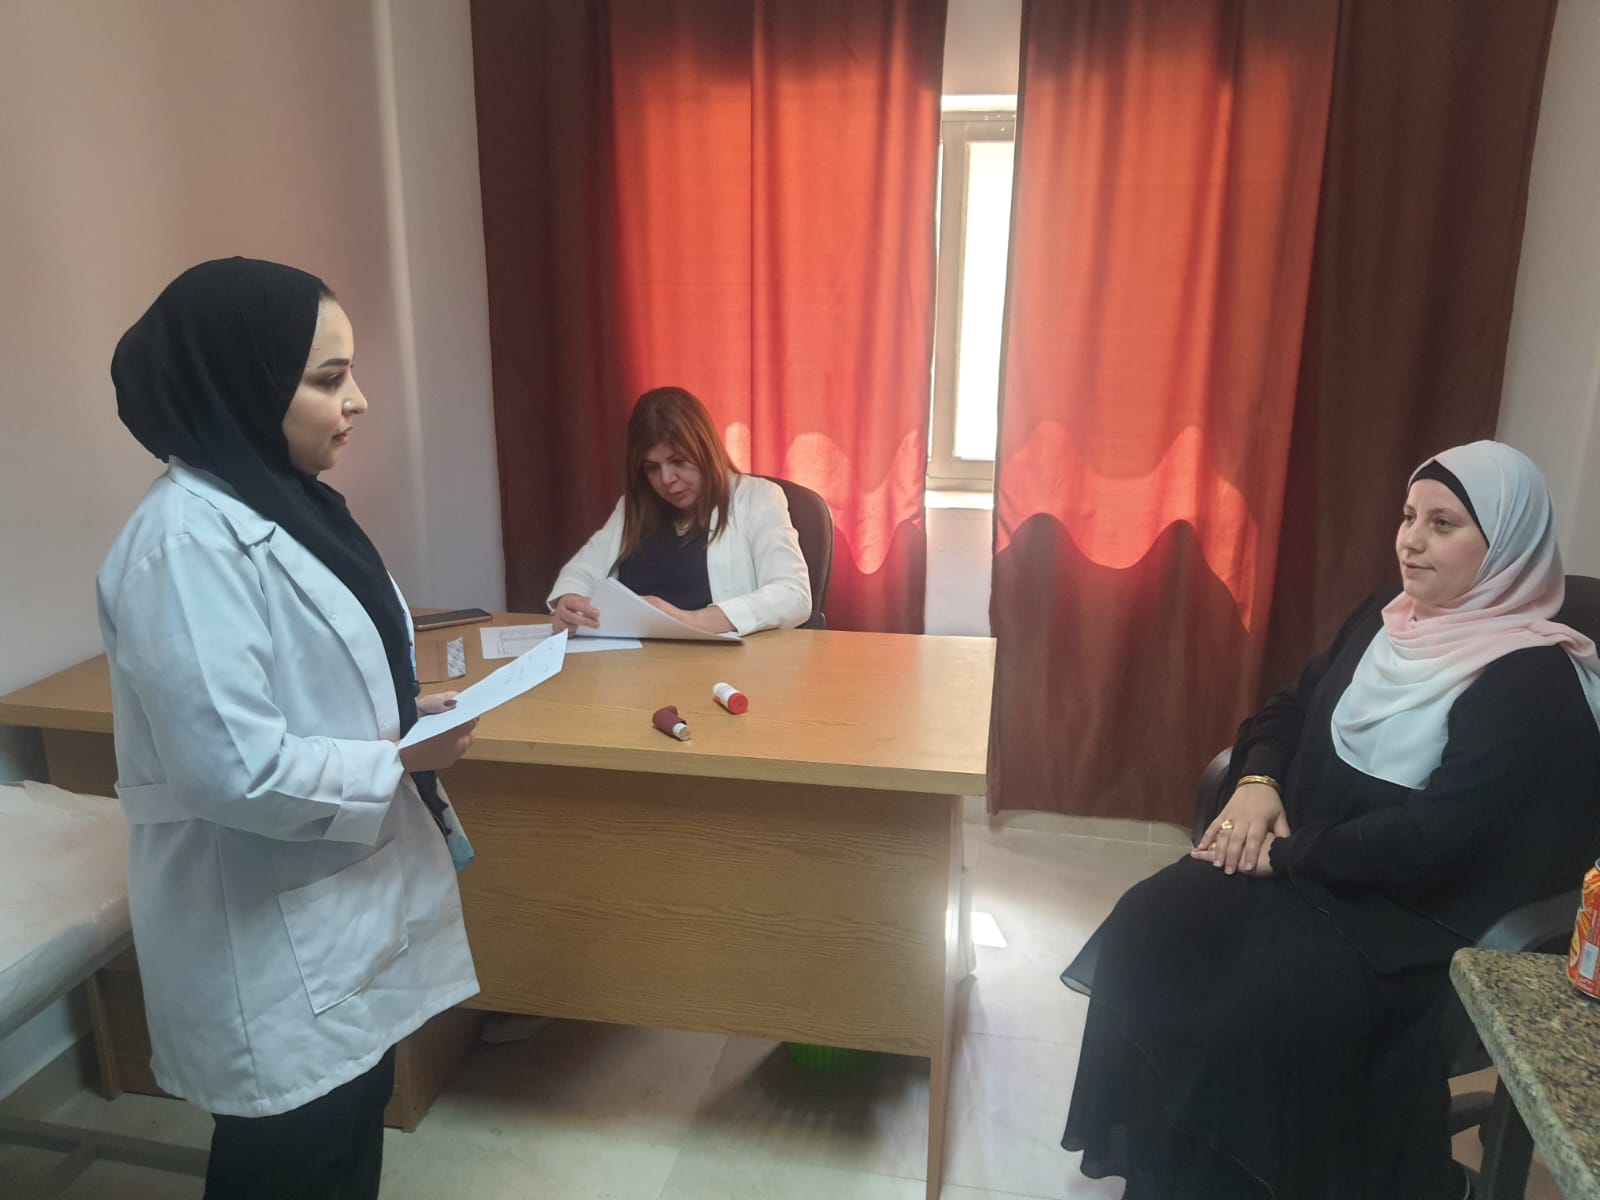 College of Pharmacy held a practical clinical skill exam for the students of the field training cour